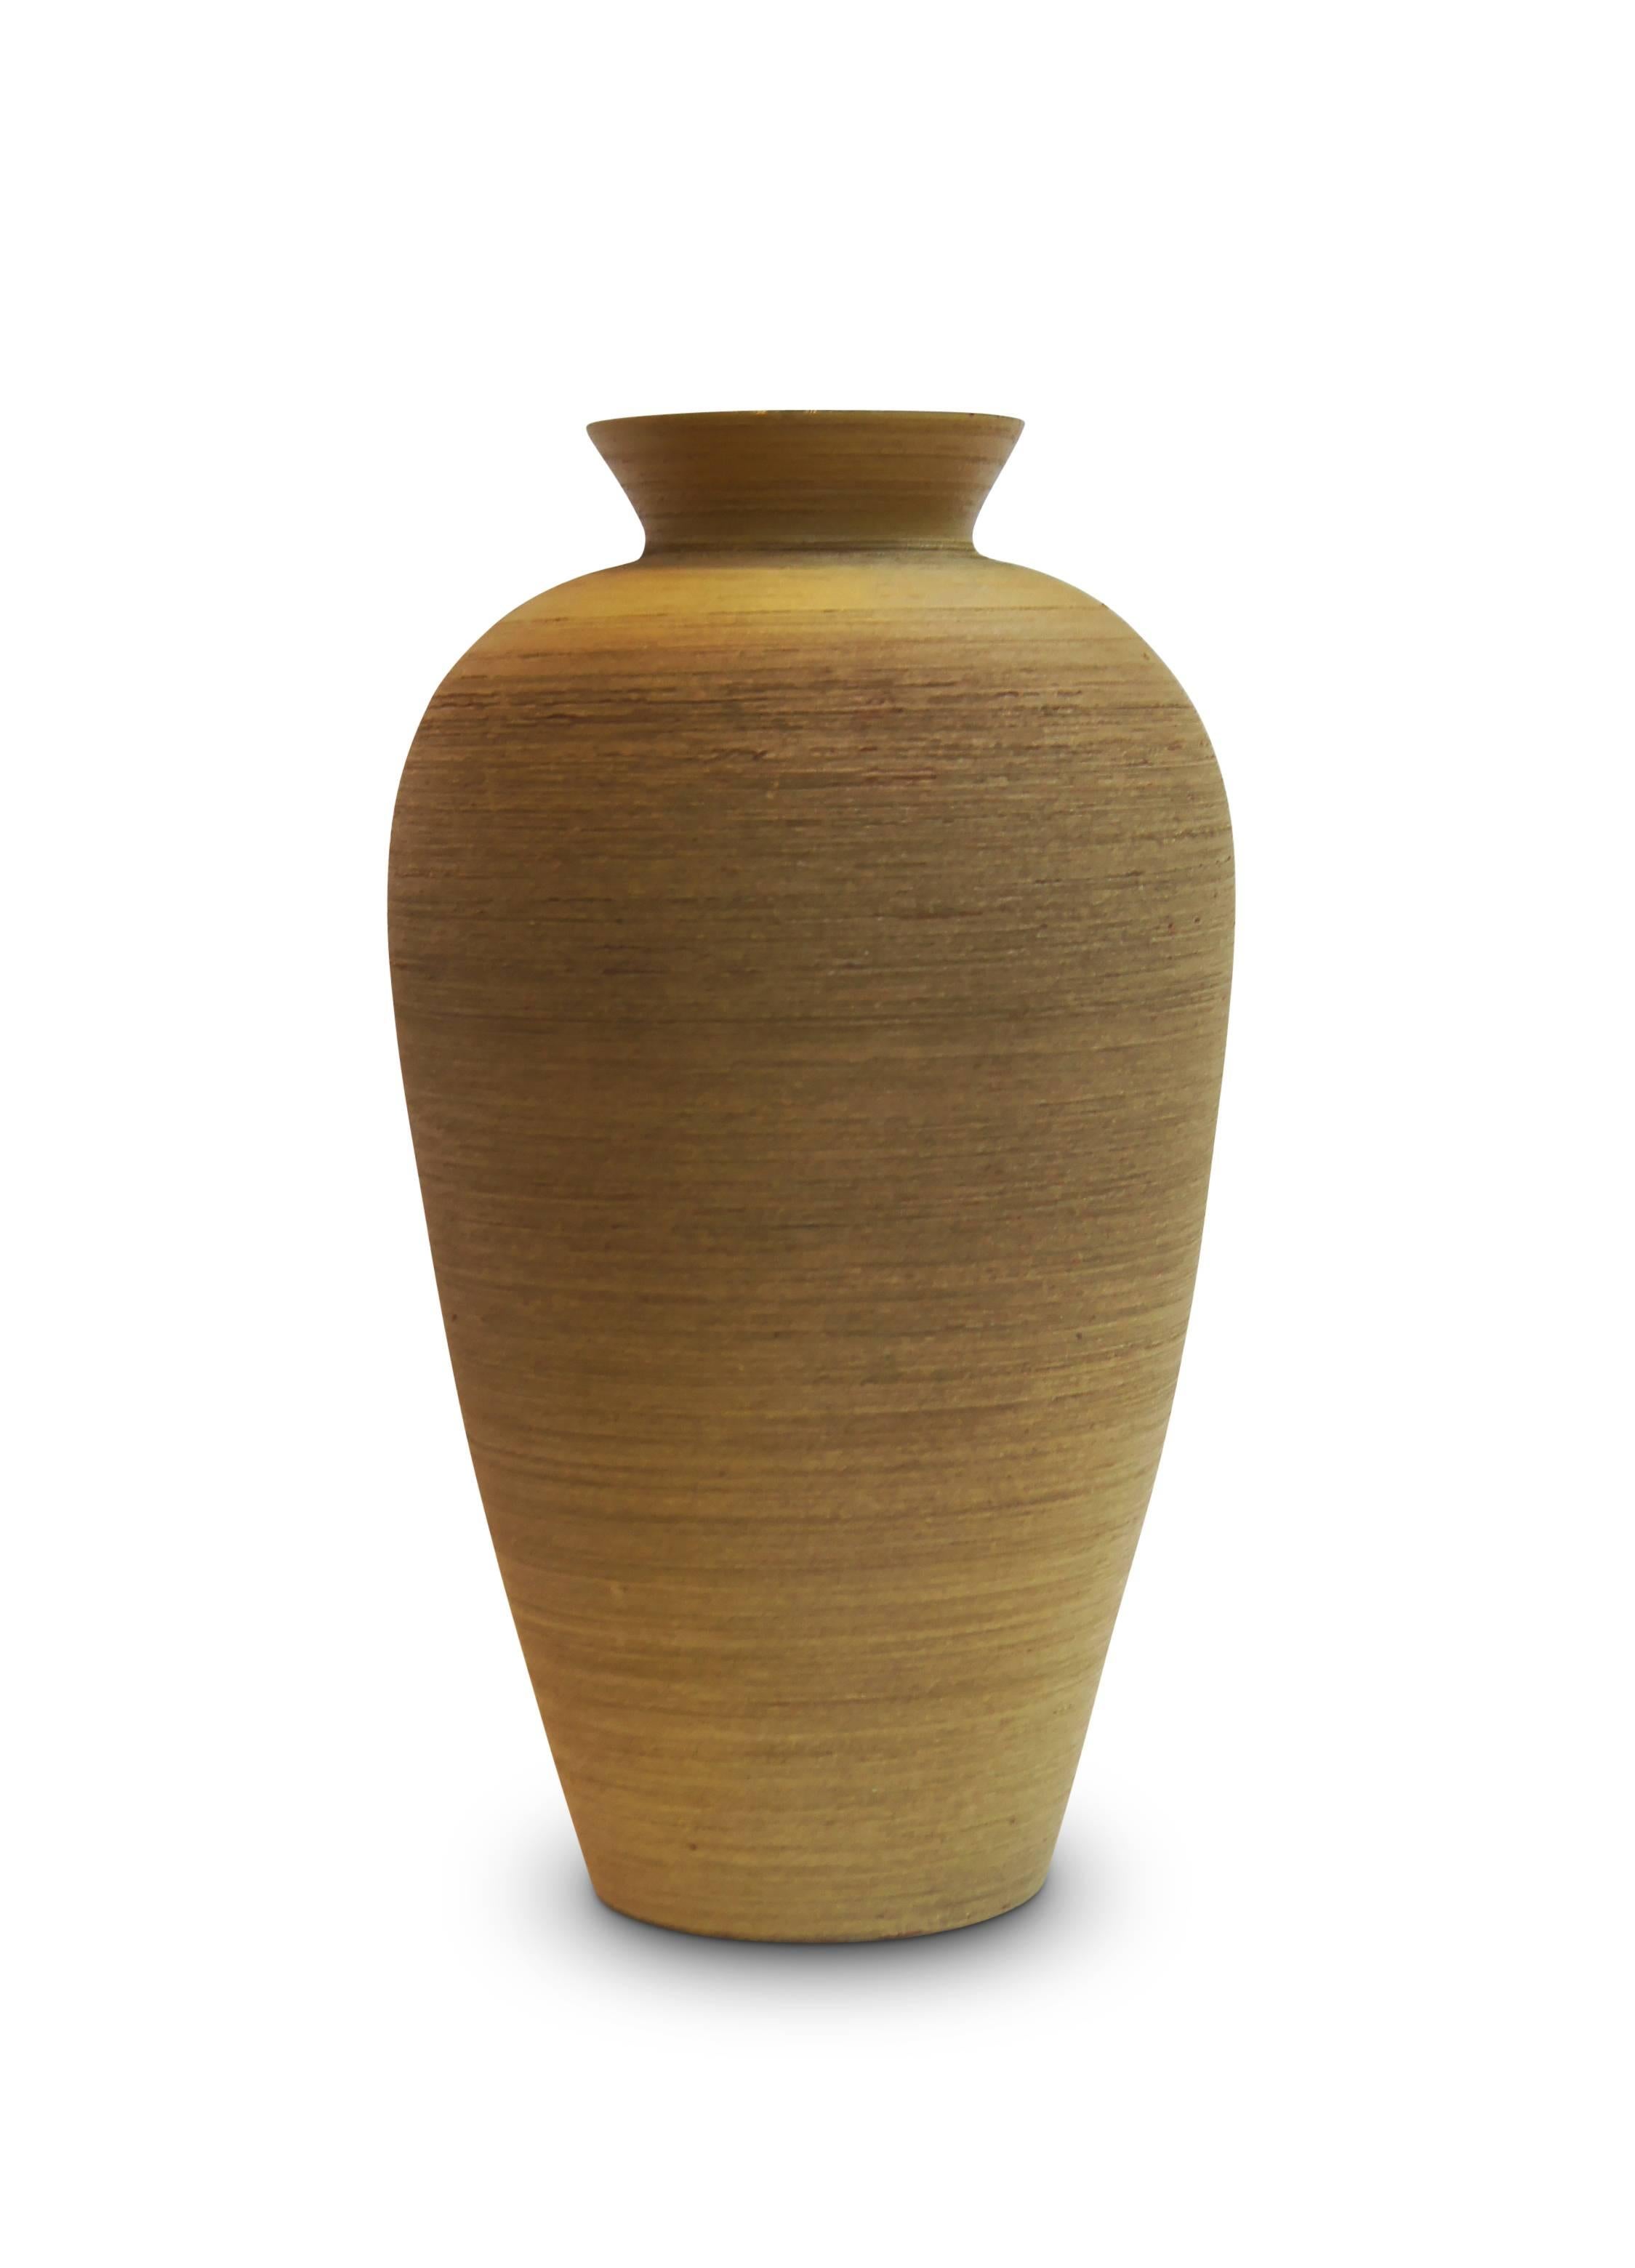 Monumental Art Deco vase duo by Upsala Ekeby in pristine condition, having superbly modeled curved and tapered sides with rounded shoulders and outwardly arced necks, outsides with wonderful raked texture and glazed a near-matte gold-brown, and